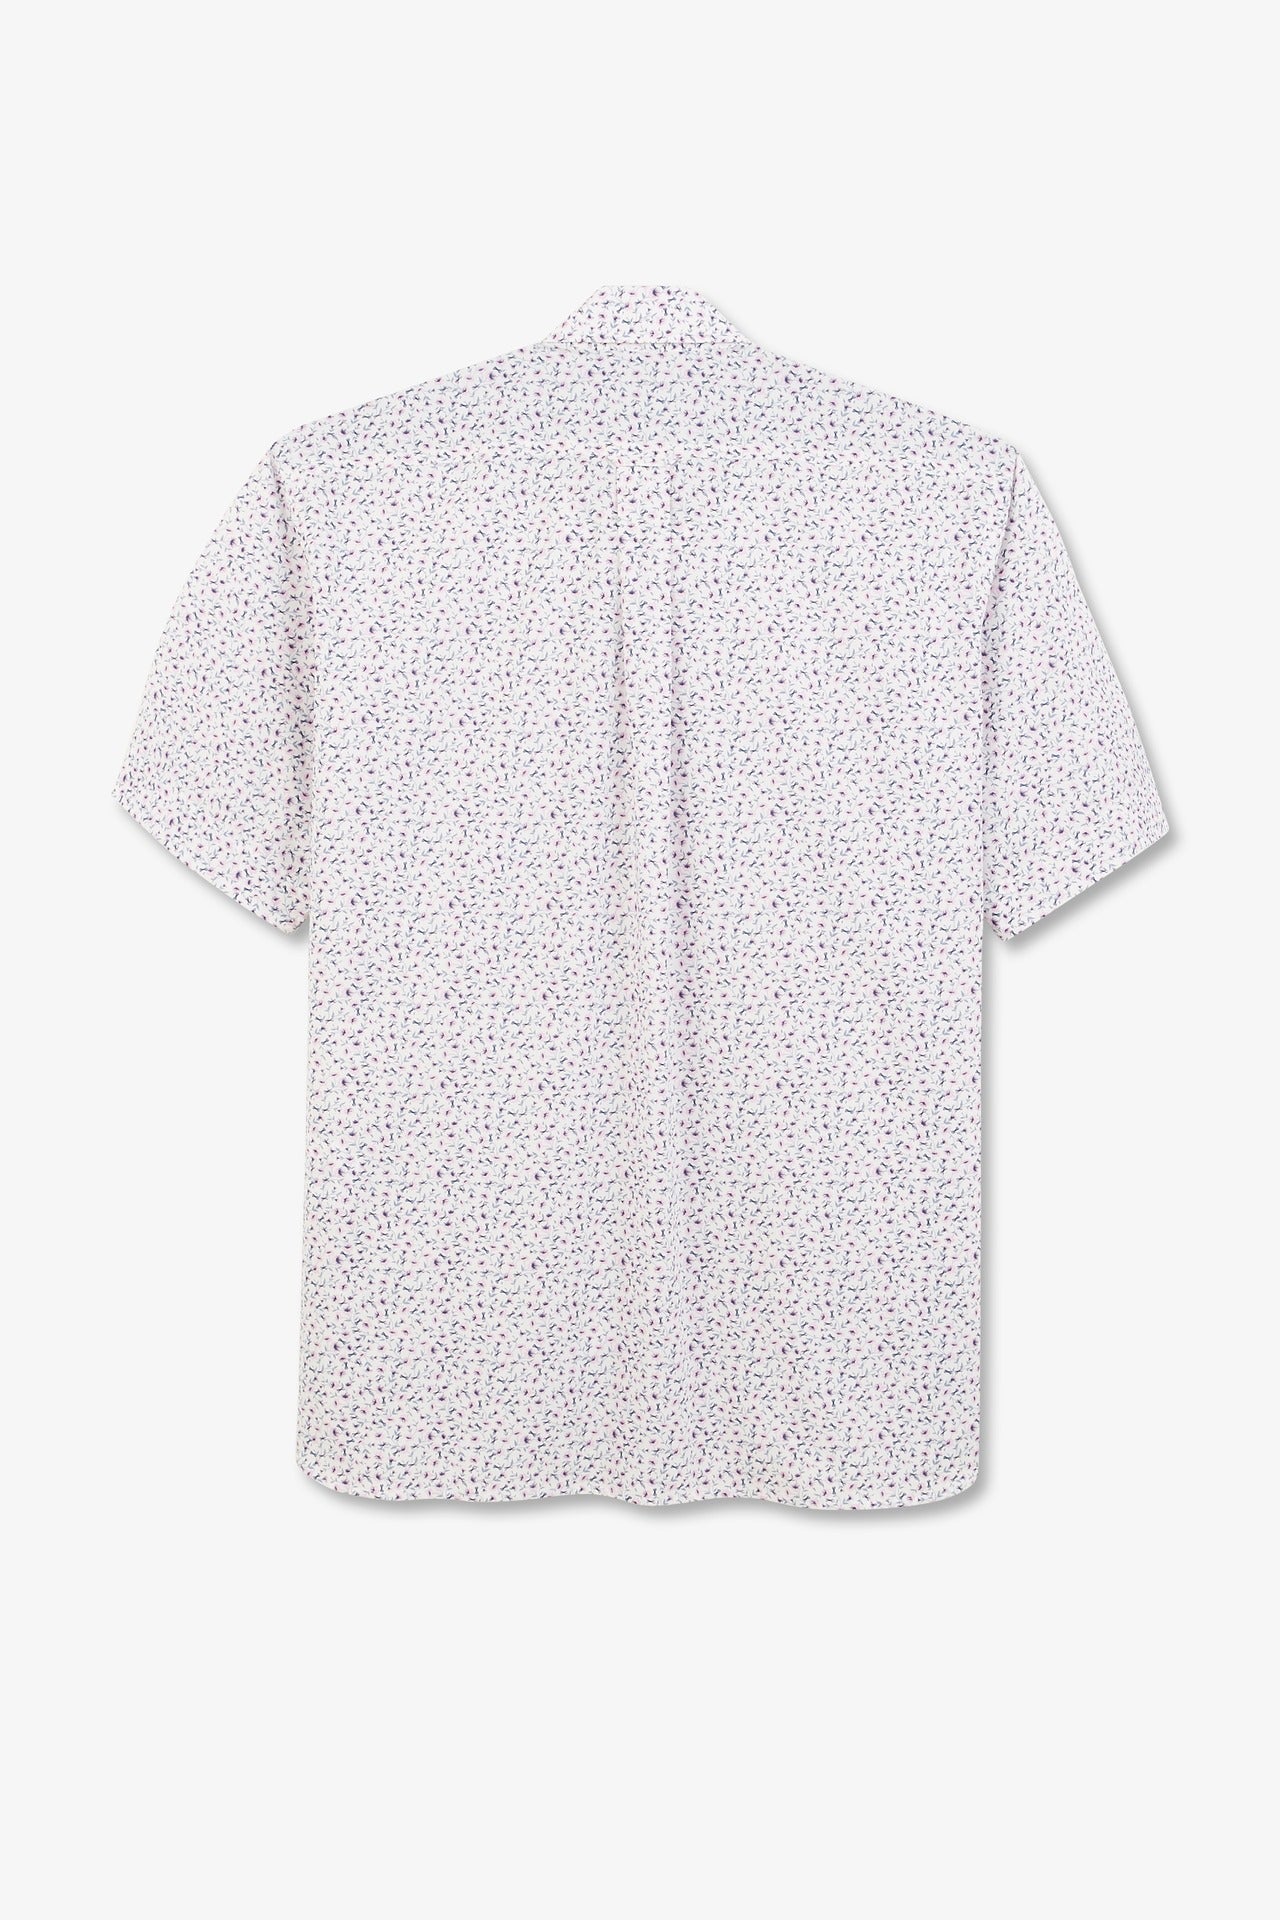 White shirt with exclusive floral print